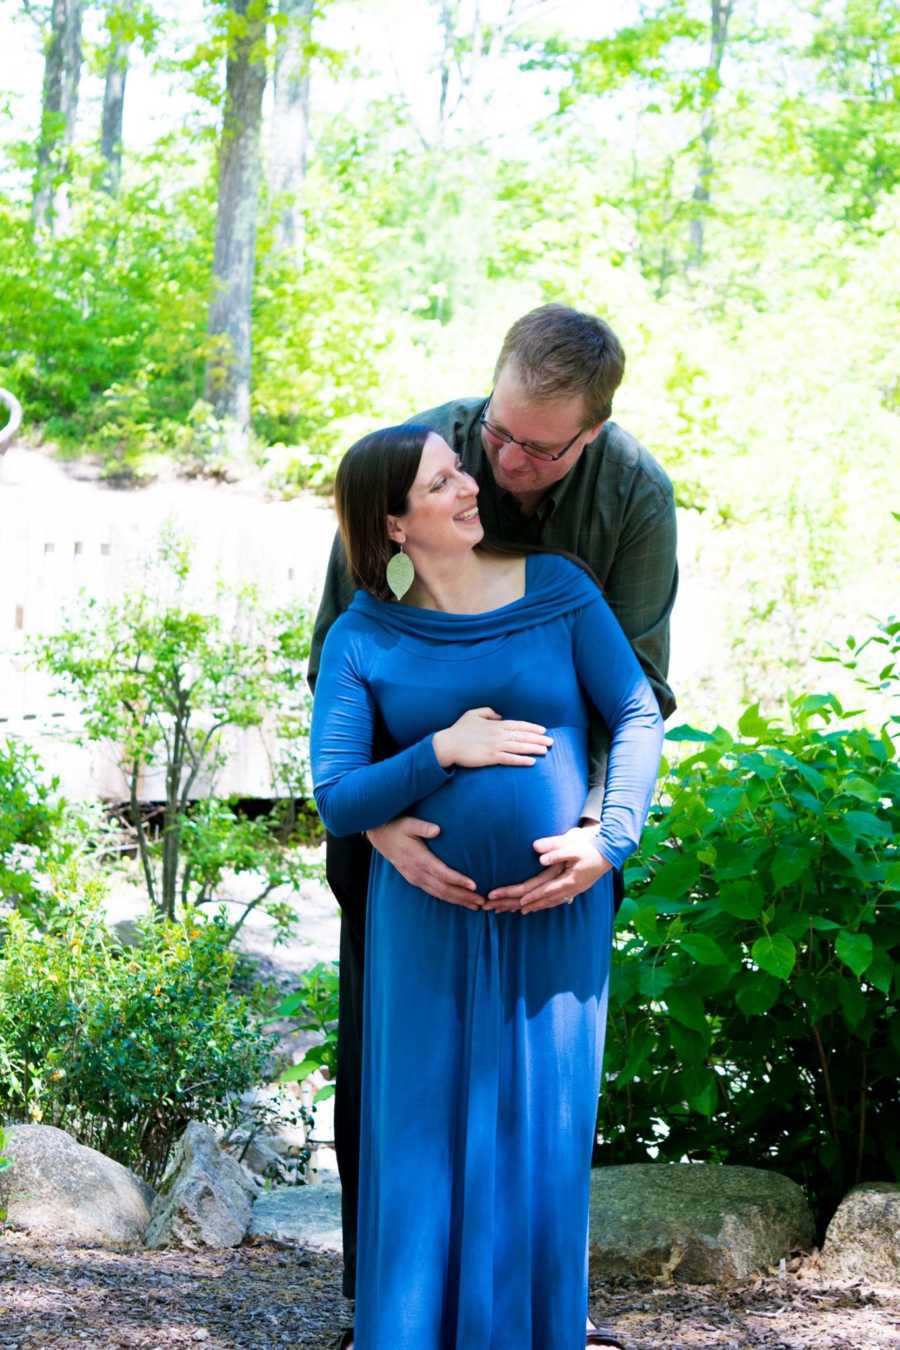 Husband stands behind pregnant wife in wooded area as they hold her stomach